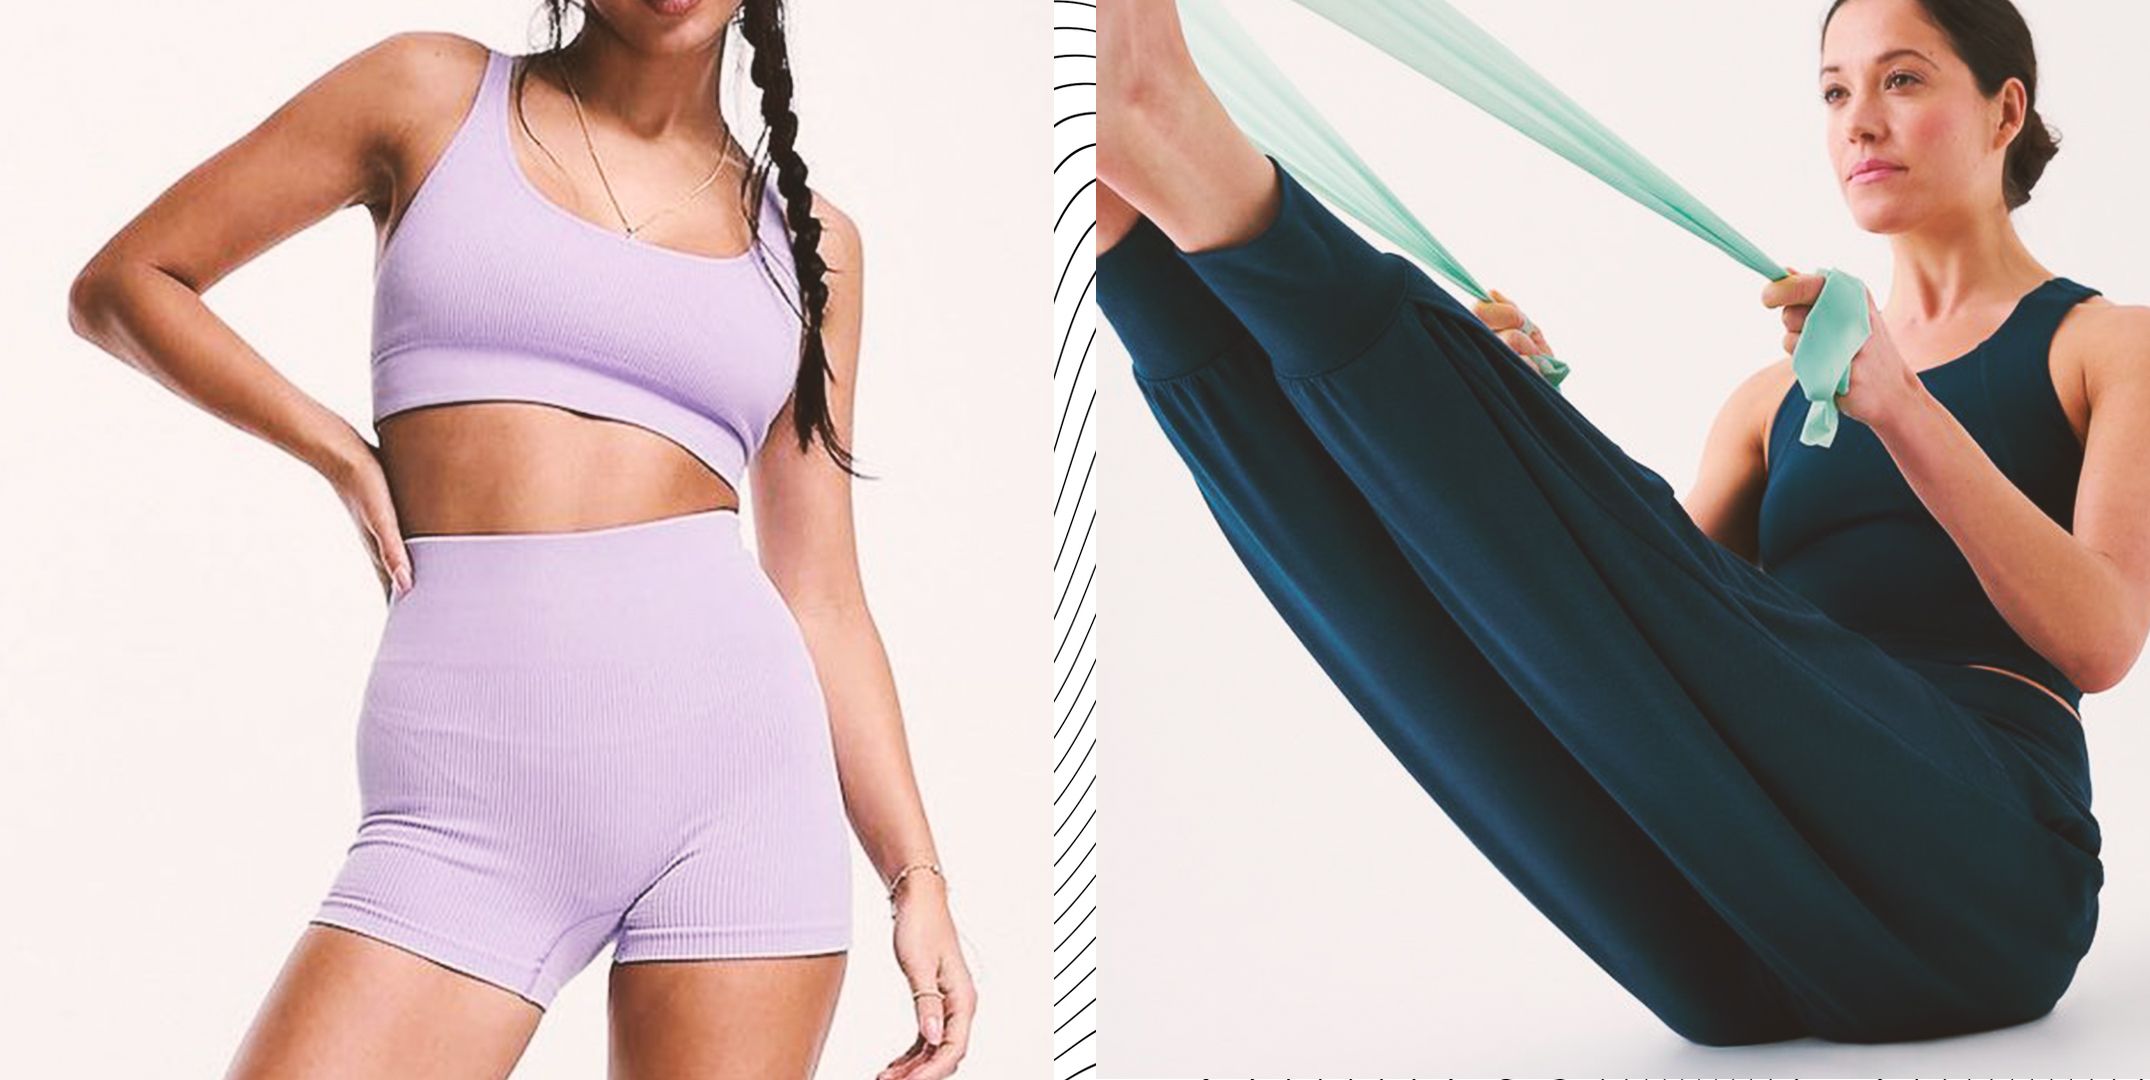 These Super Cute Yoga Outfits Will Make Your Warrior Pose Look